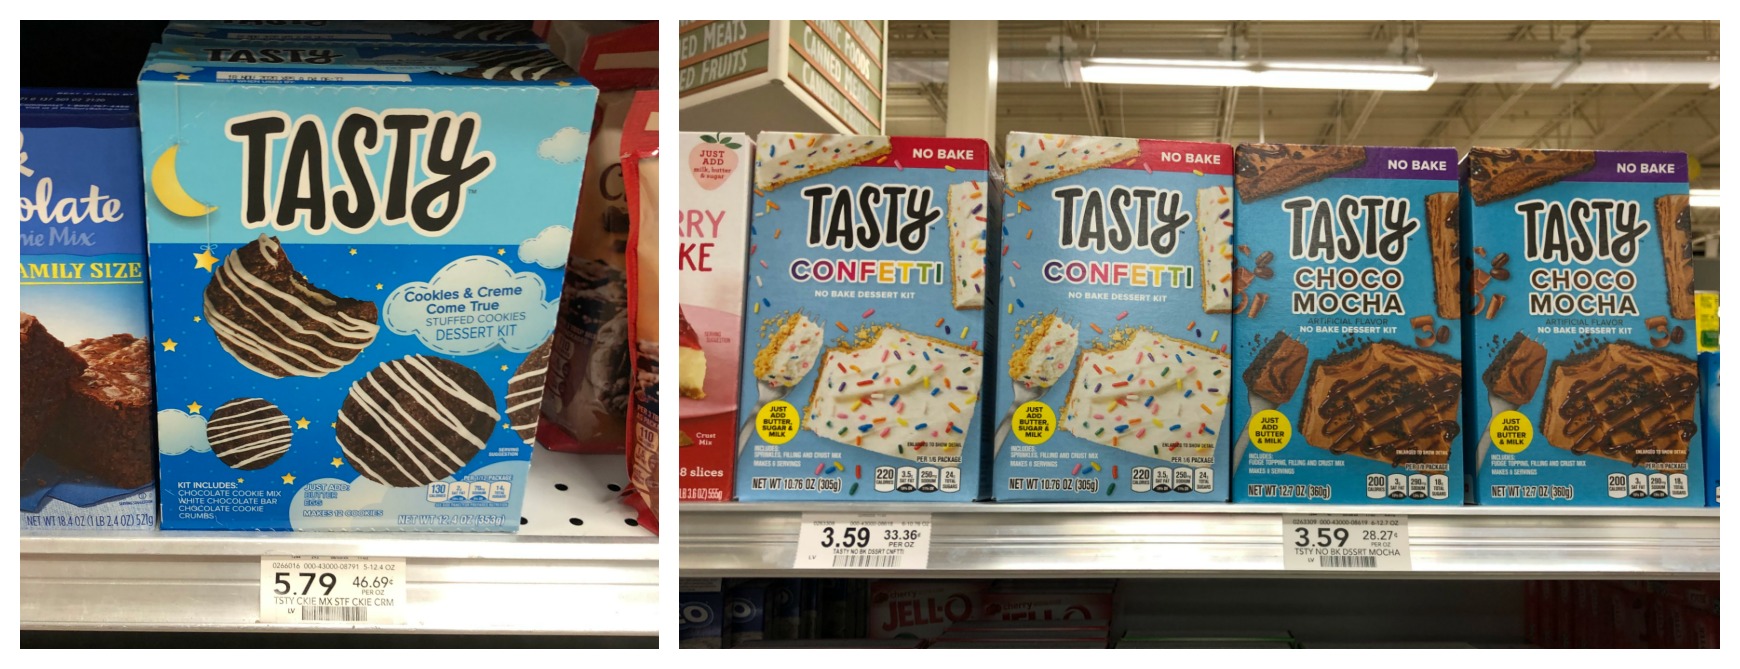 Save On The Delicious Tasty No Bake And Cookie Mix Kits At Publix on I Heart Publix 1